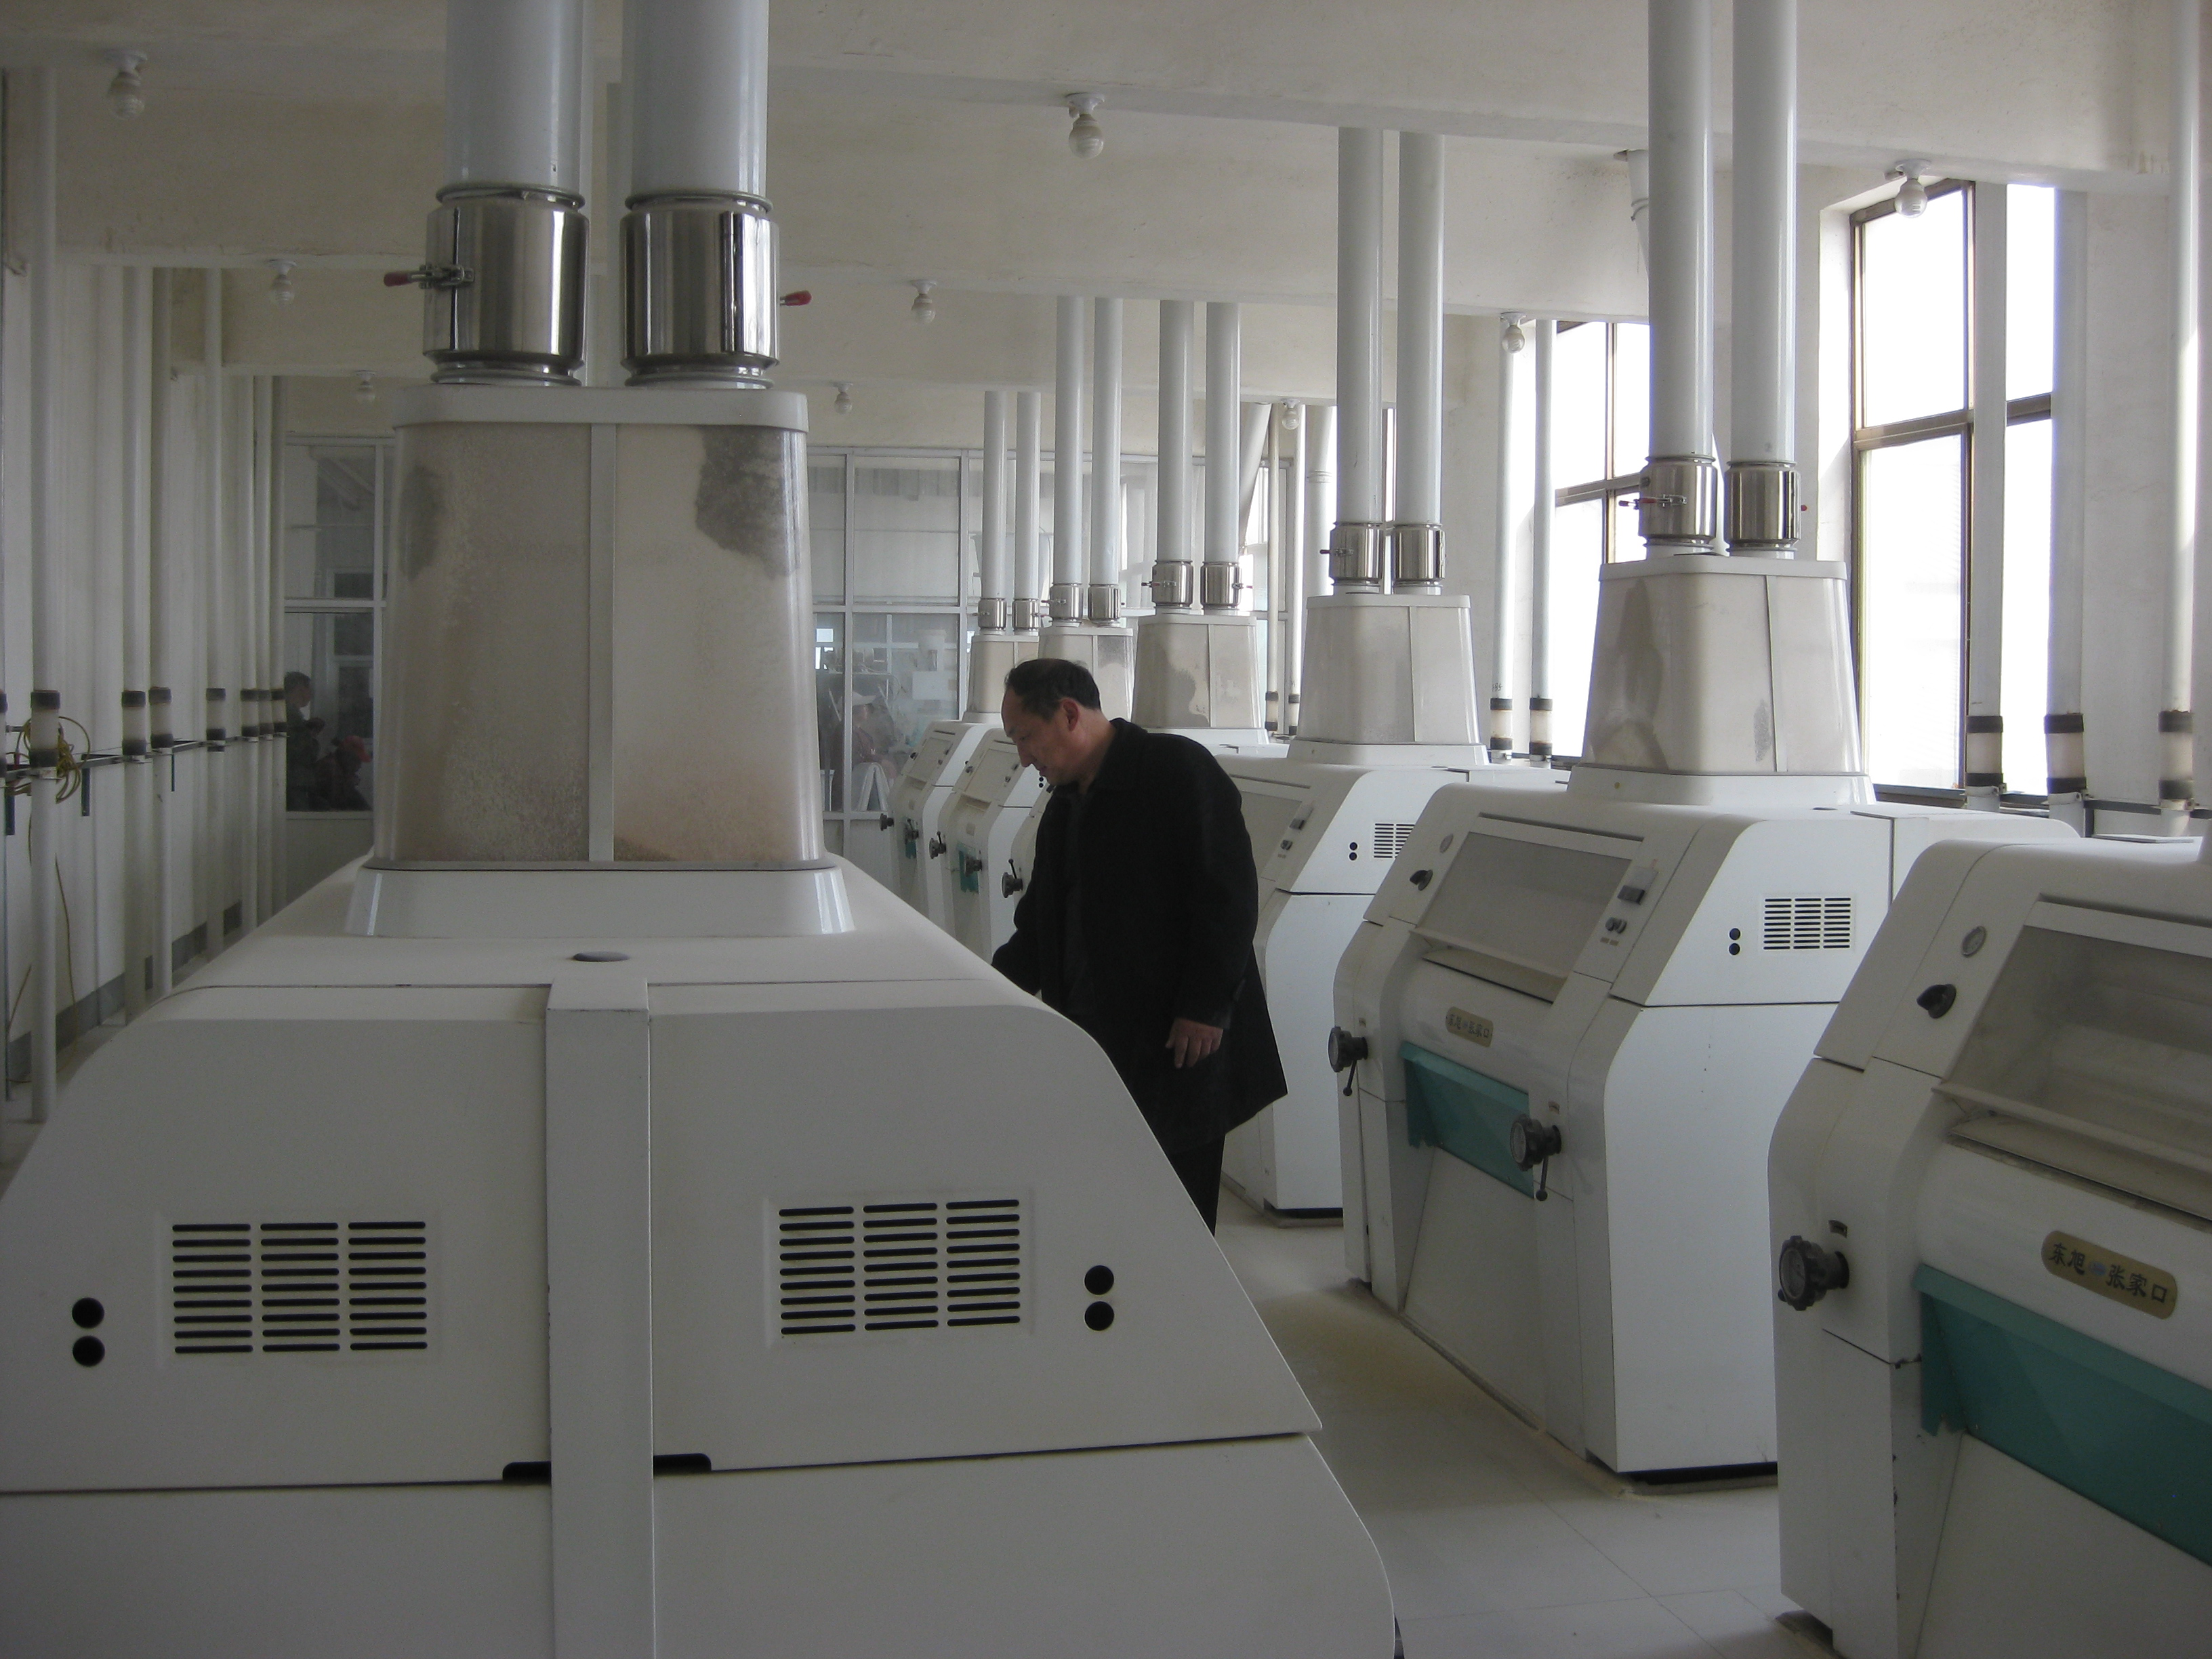 installation of the 200T wheat flour grinding mill project